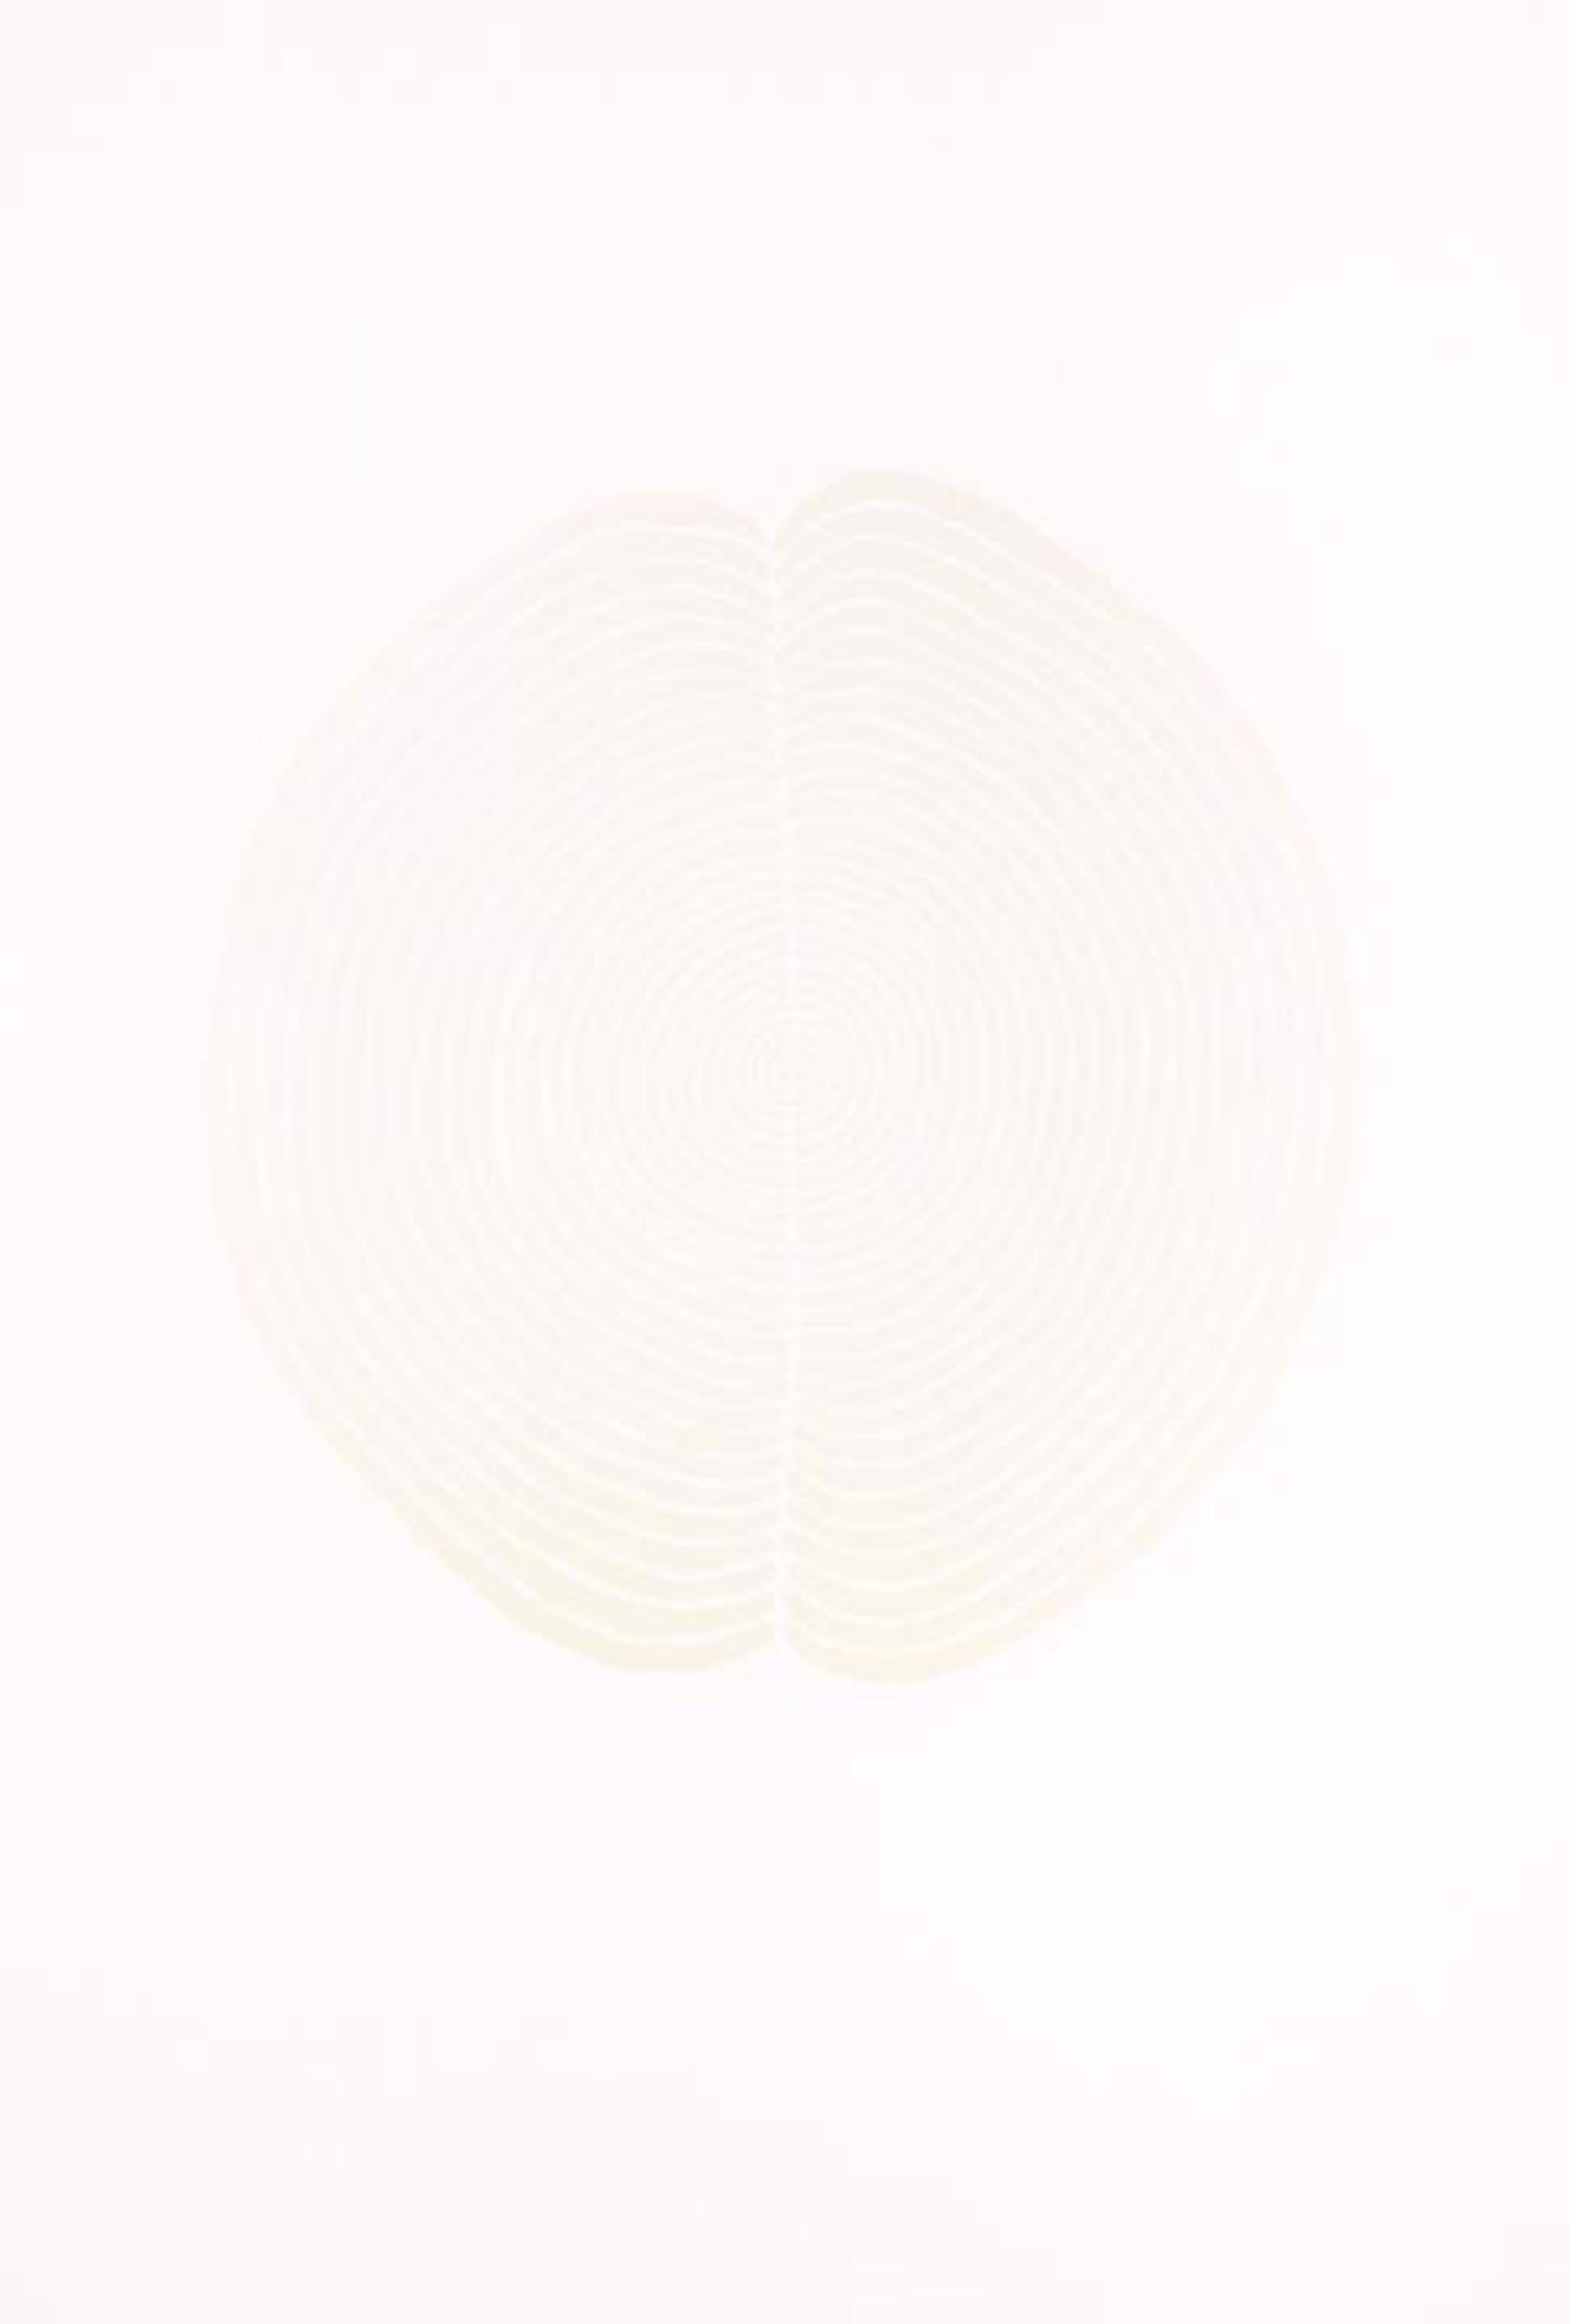 Brain Field, 2007
Antony Gormley 

Lithograph, on 300g. Velin d’Arches paper
Signed and numbered from the edition of 40
Published by Edition Copenhagen, Copenhagen
Sheet: 100 × 69 cm (39.4 × 27.2 in)